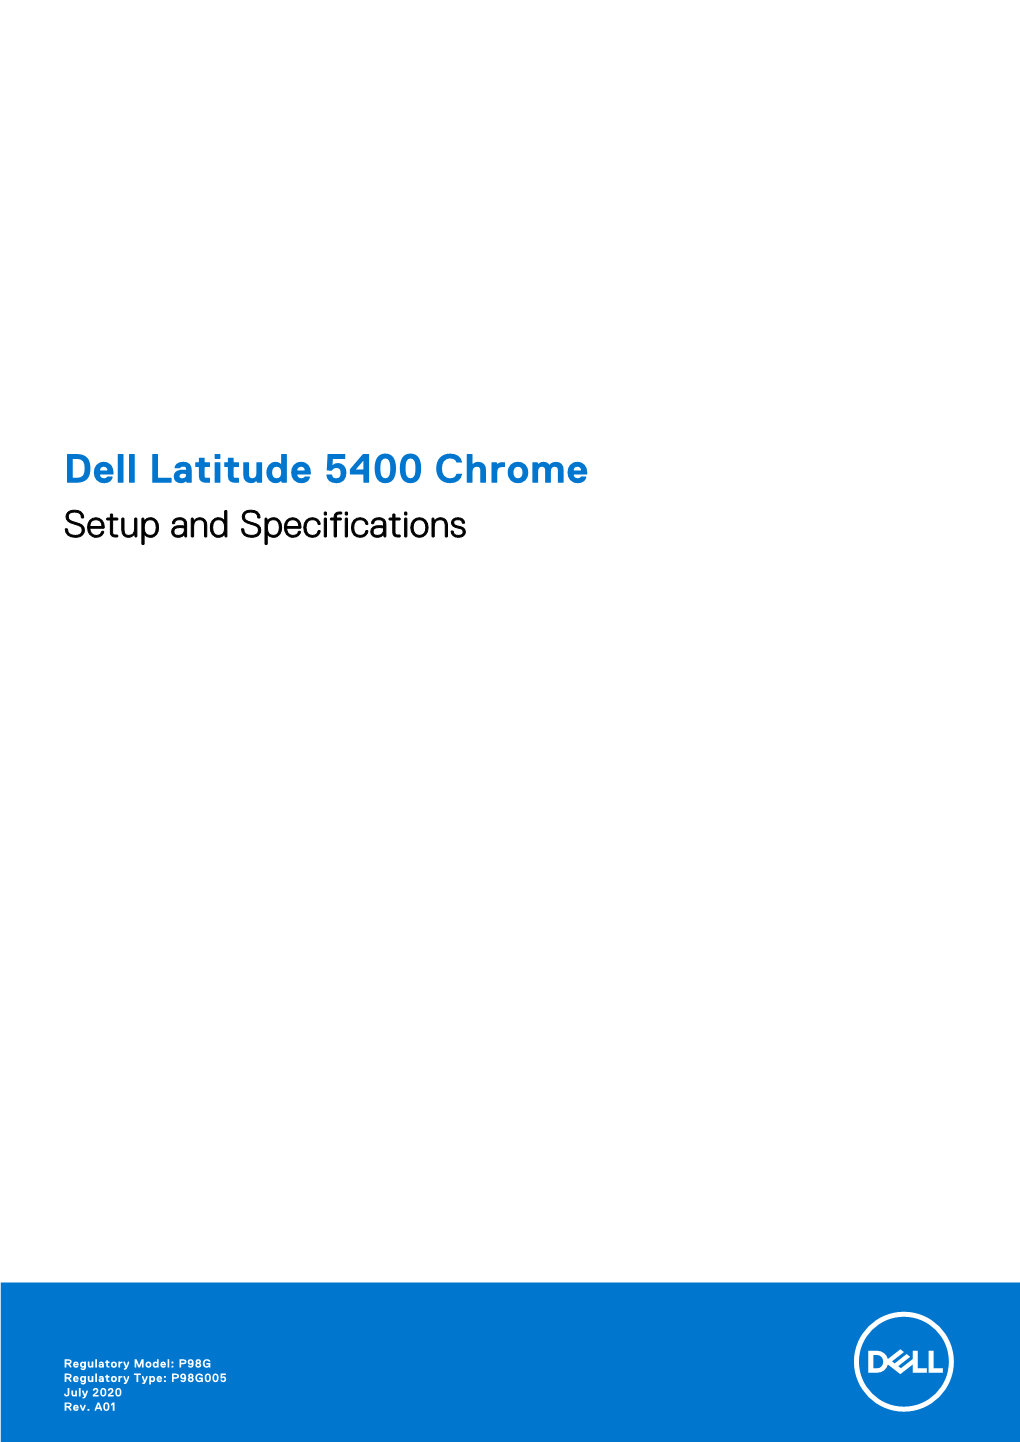 Dell Latitude 5400 Chrome Setup and Specifications